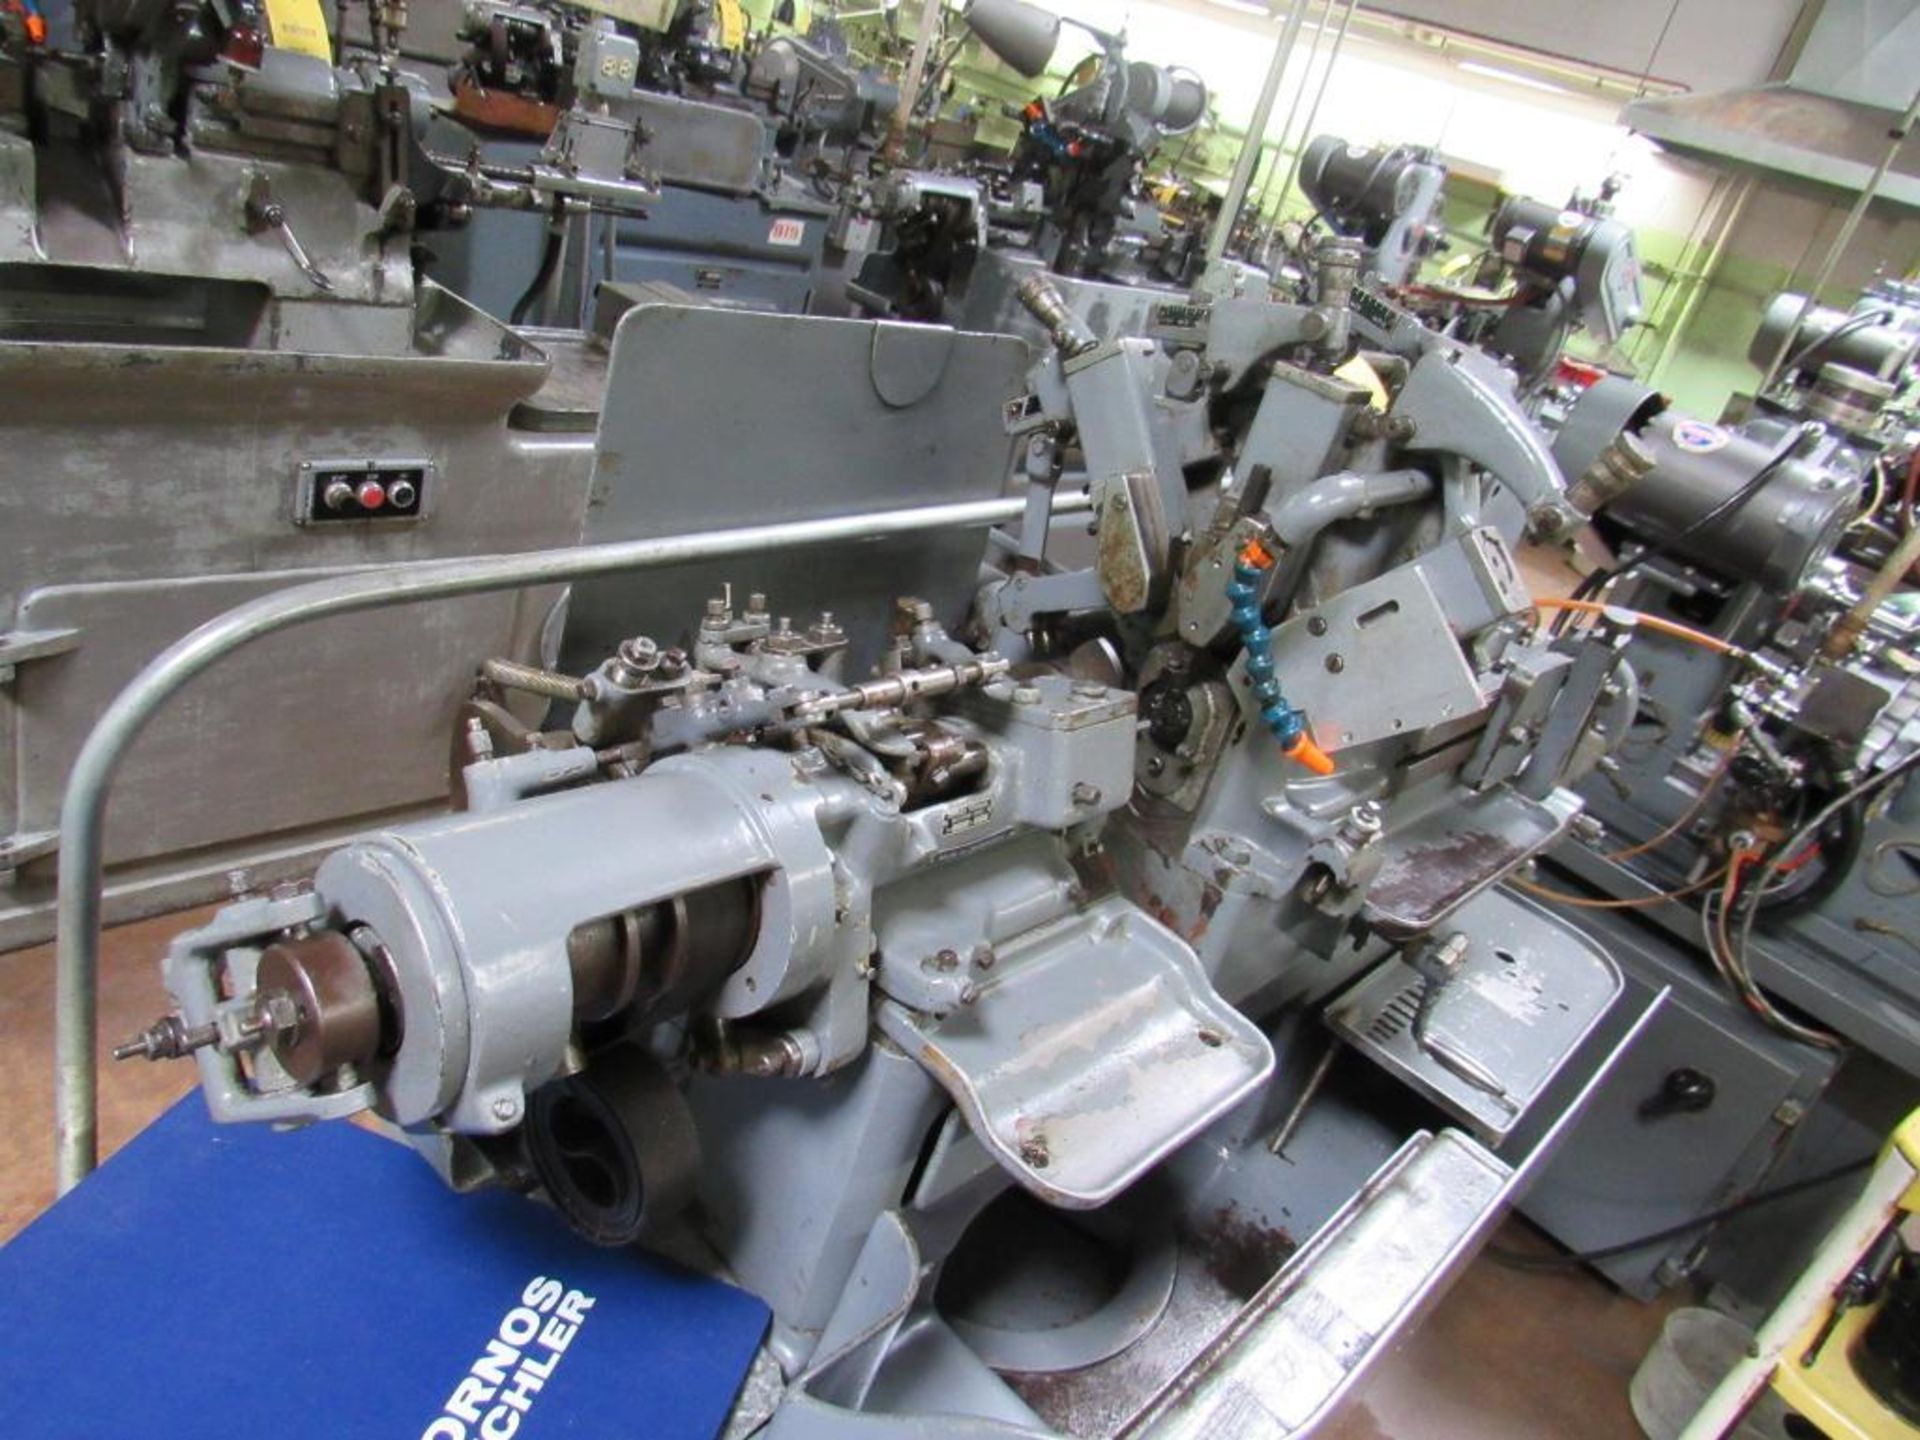 Tornos Bechler Single-Spindle Automatic Screw Machine Model R10, S/N 26558 - Image 3 of 4